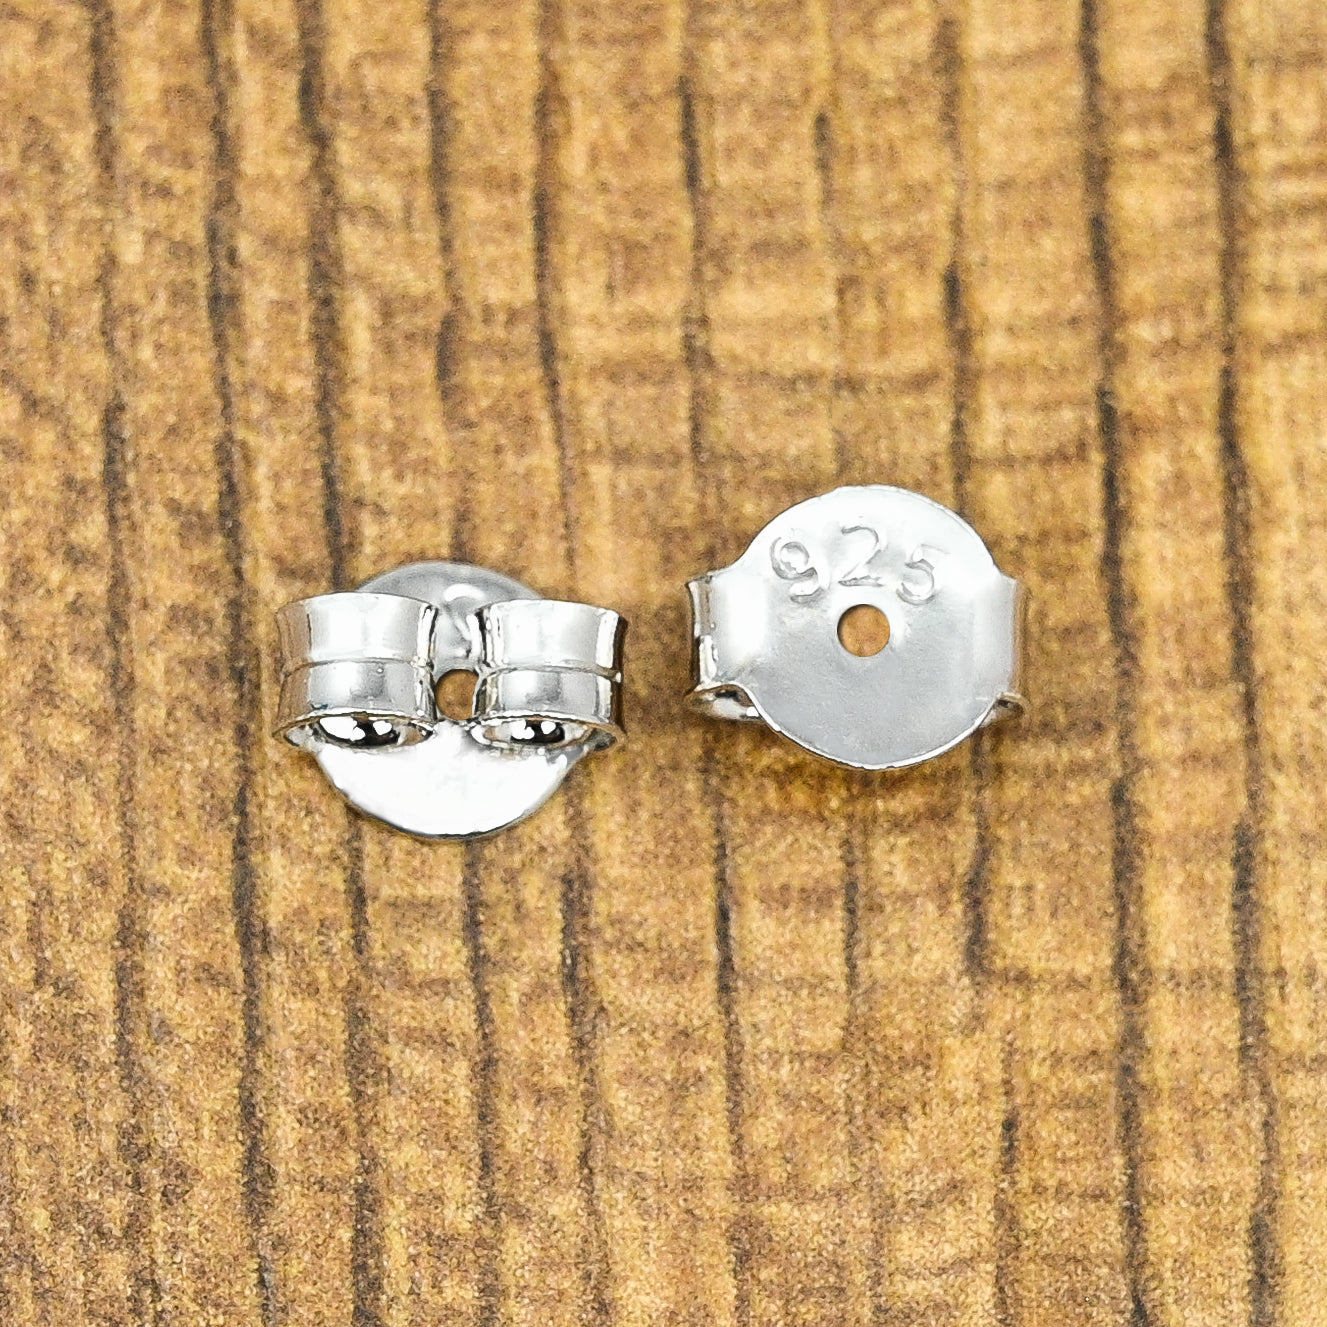 Round Silver Studs with Cubic Zirconia